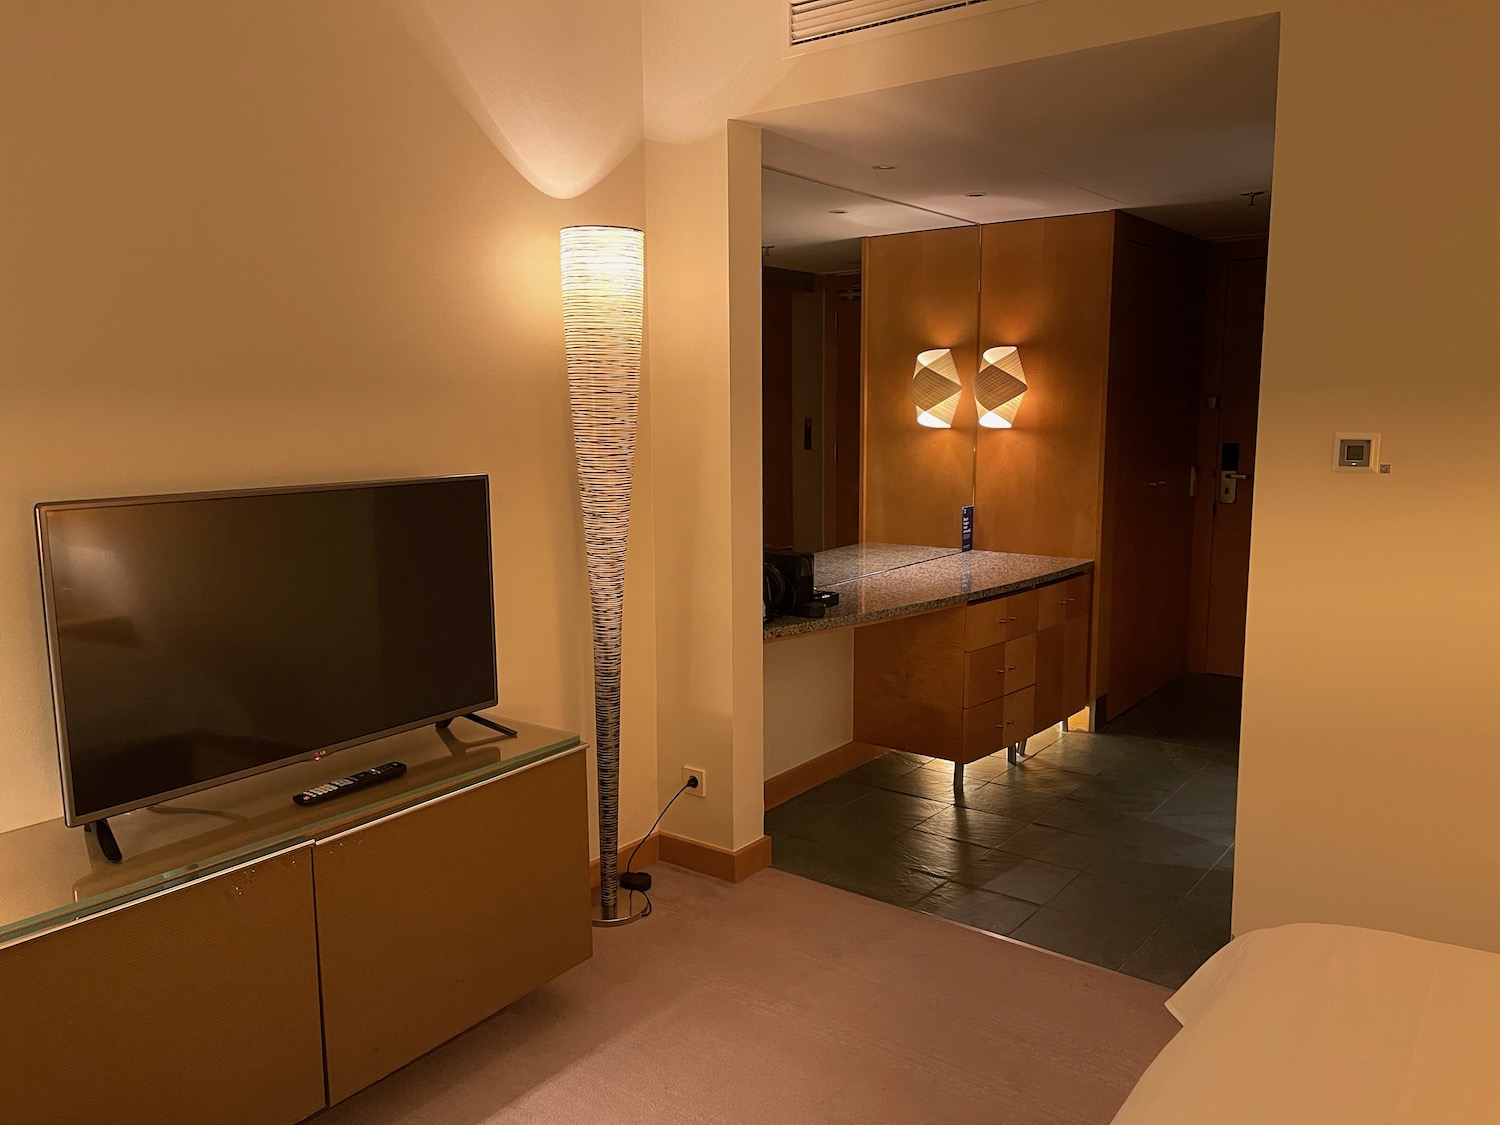 a room with a tv and a mirror